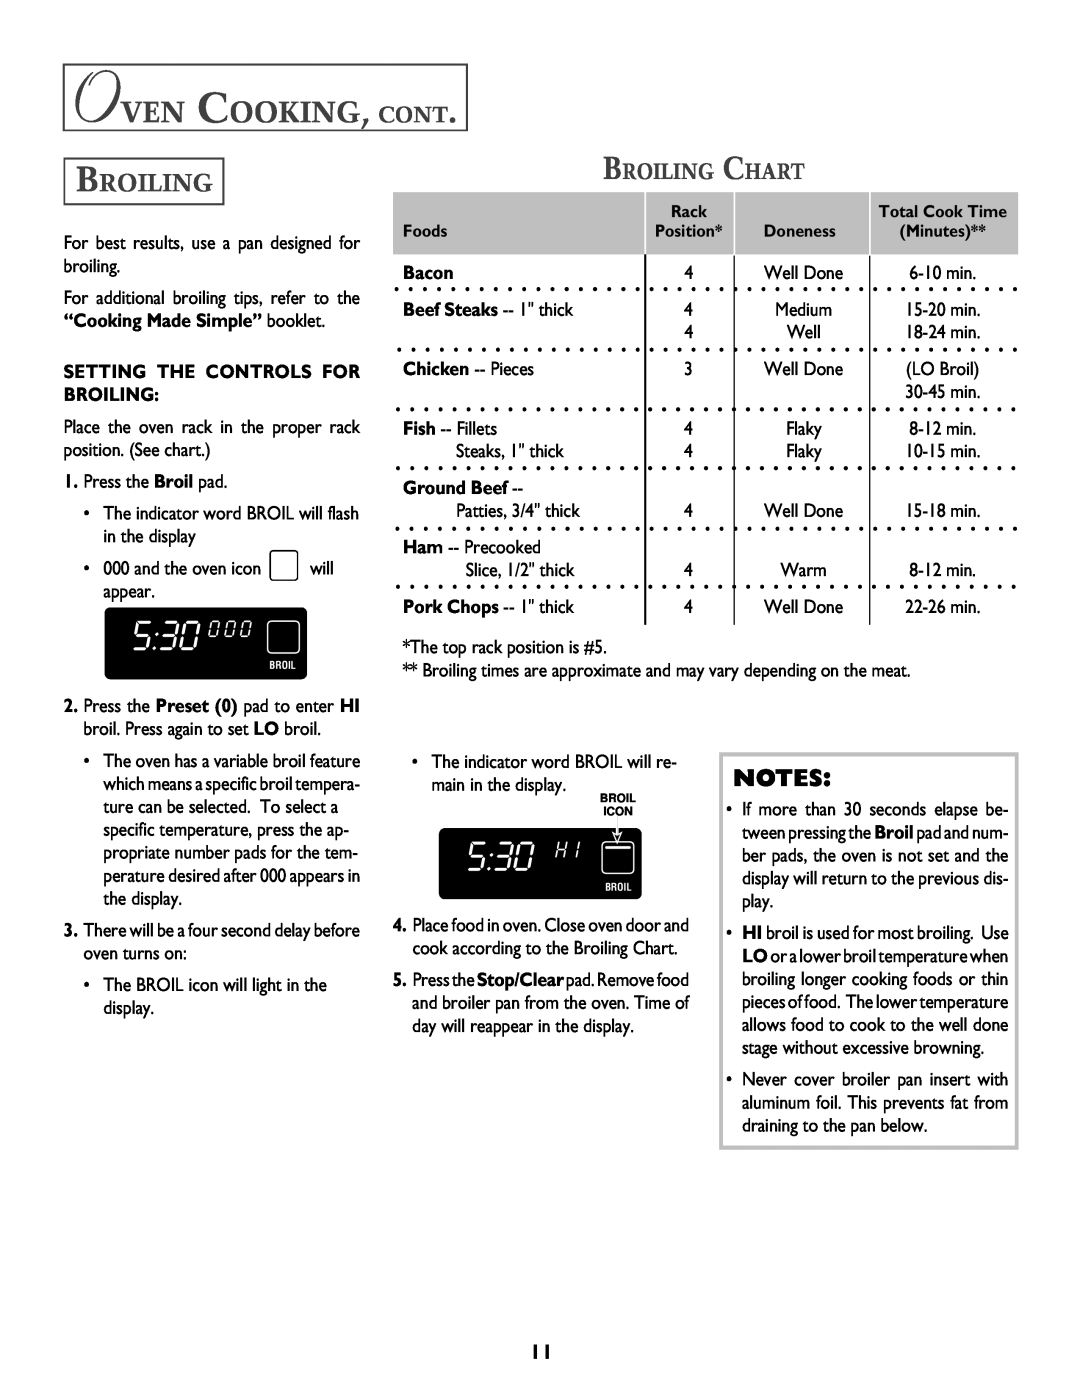 Jenn-Air T2 530 H, Broiling Chart, Setting The Controls For Broiling, Bacon Beef Steaks -- 1 thick, Ground Beef, 530 0 